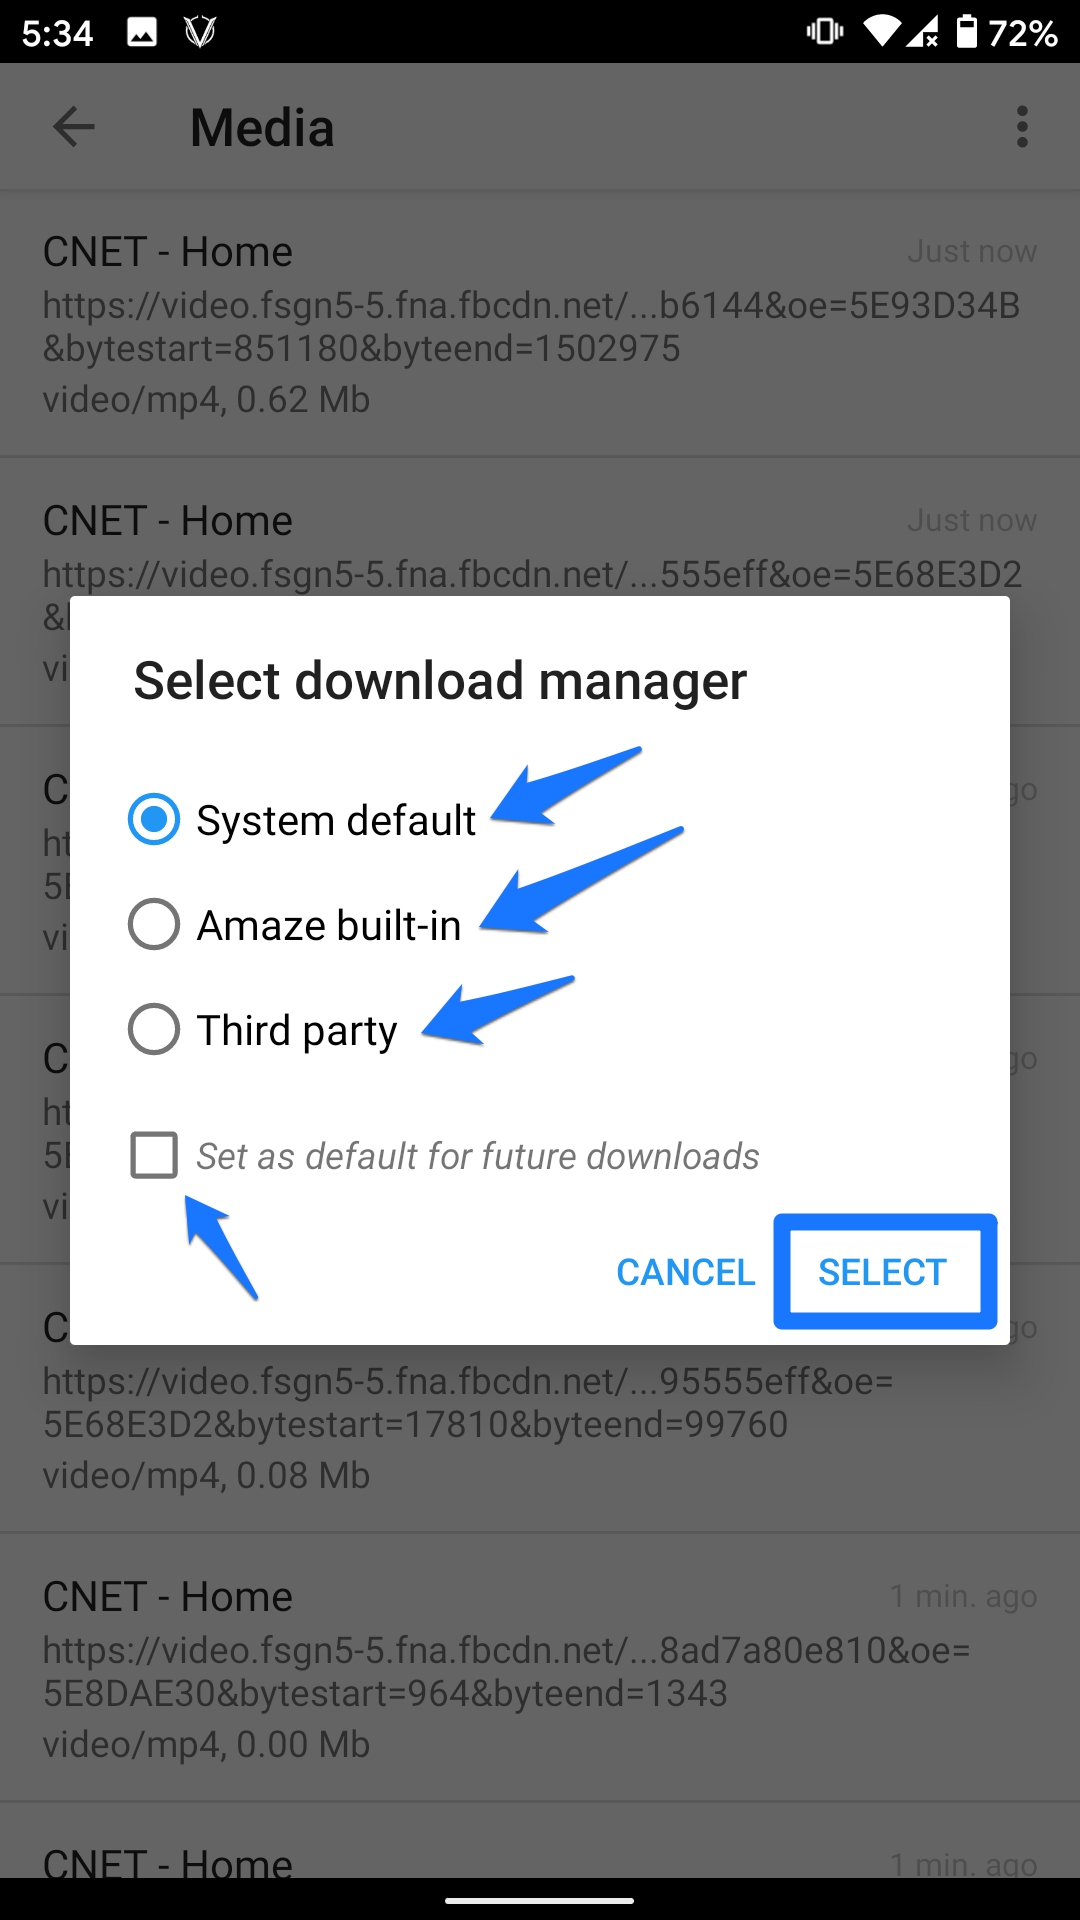 download the new for android Facebook Video Downloader 6.20.2